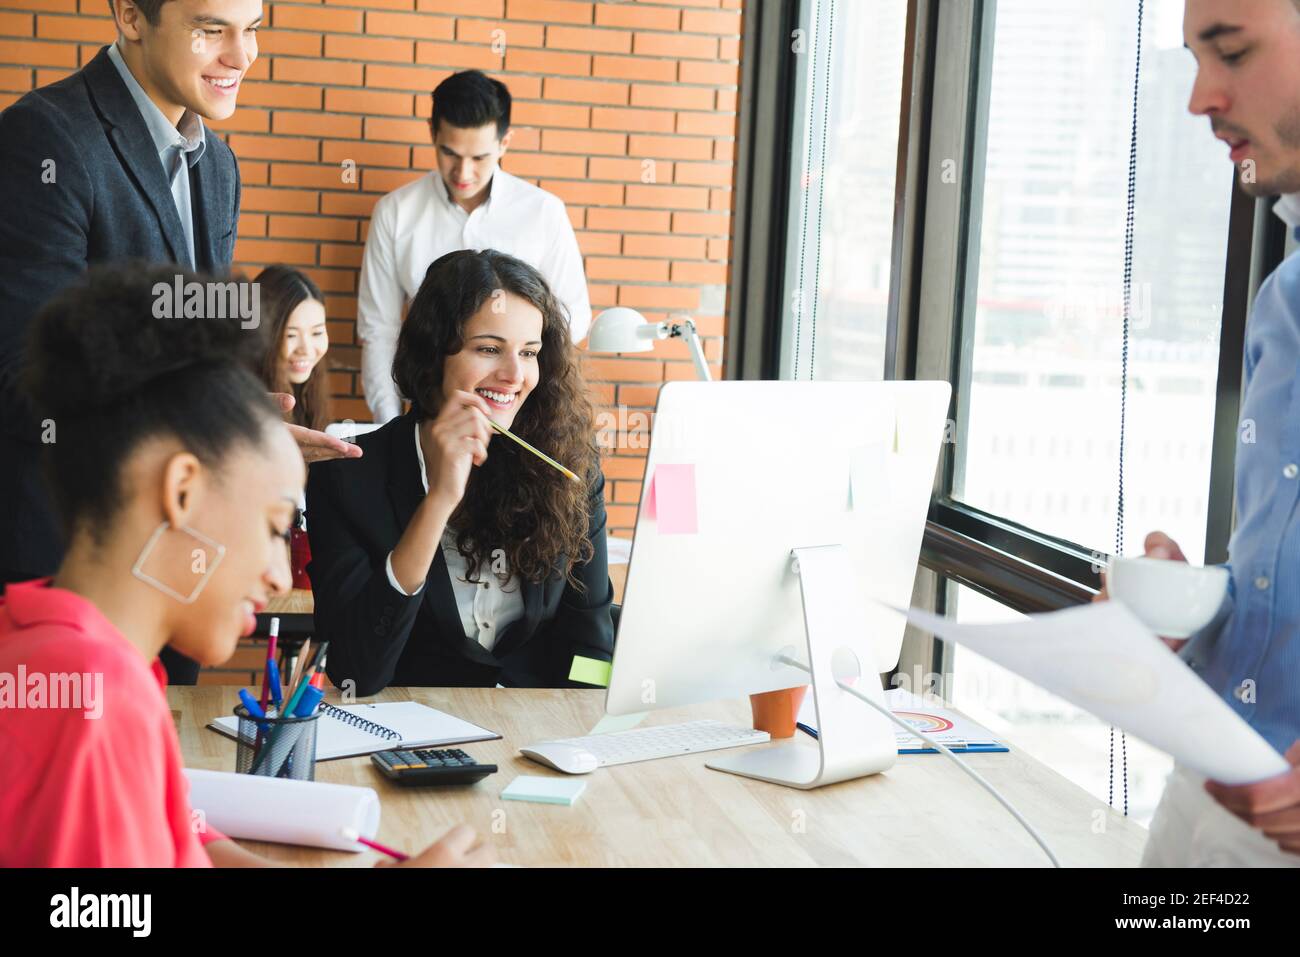 Multiethnics business people in co-working space Stock Photo